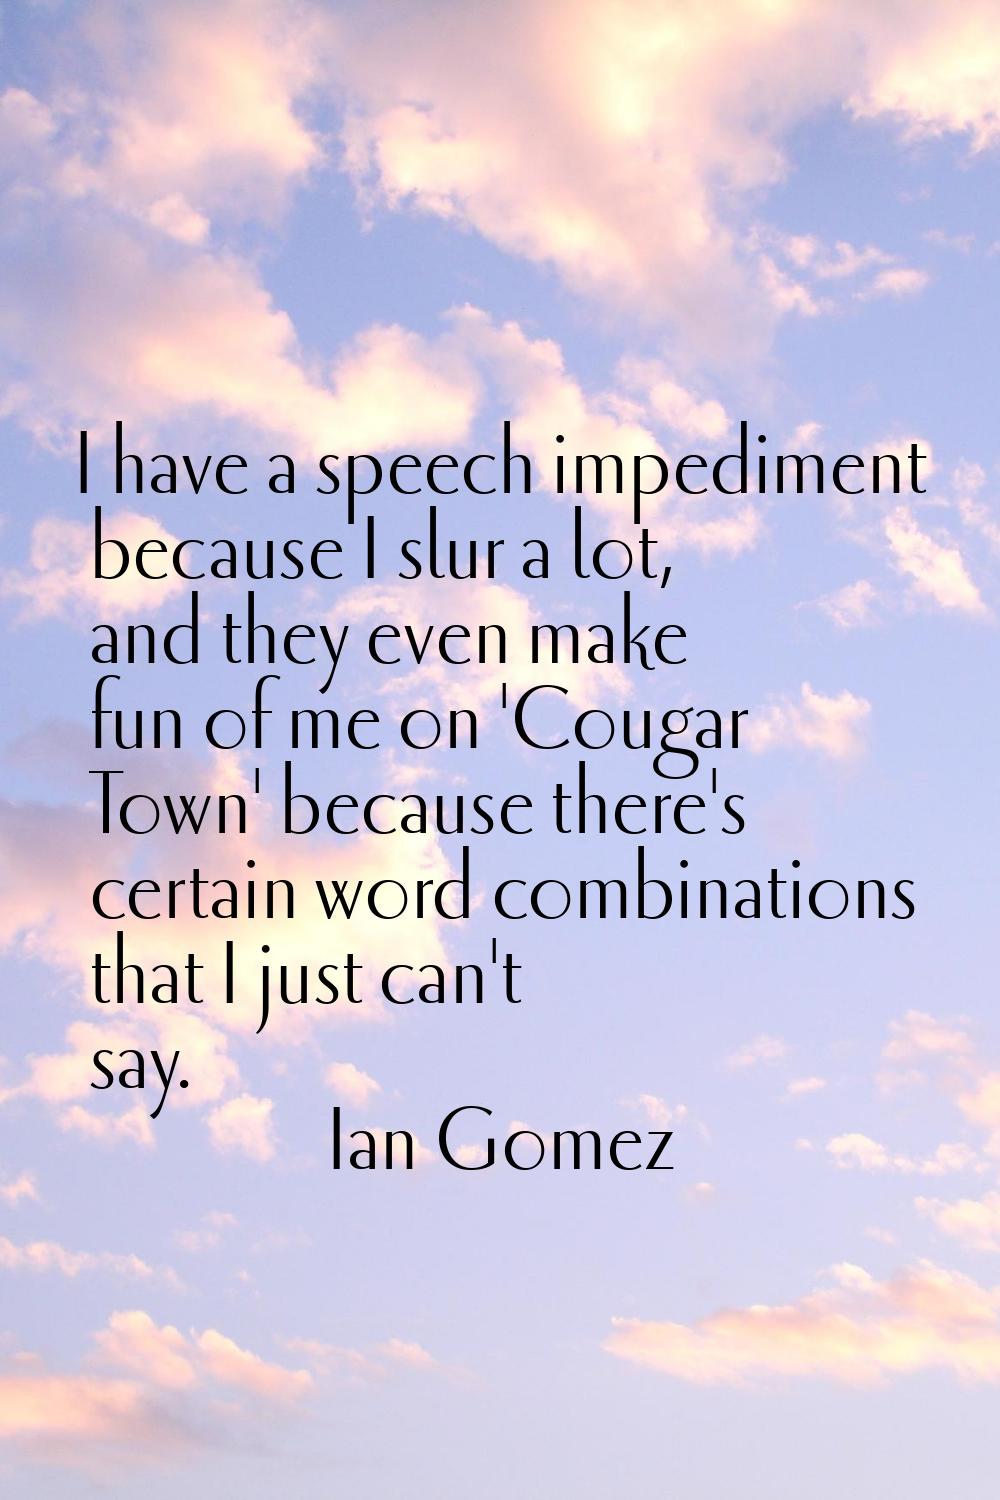 I have a speech impediment because I slur a lot, and they even make fun of me on 'Cougar Town' beca